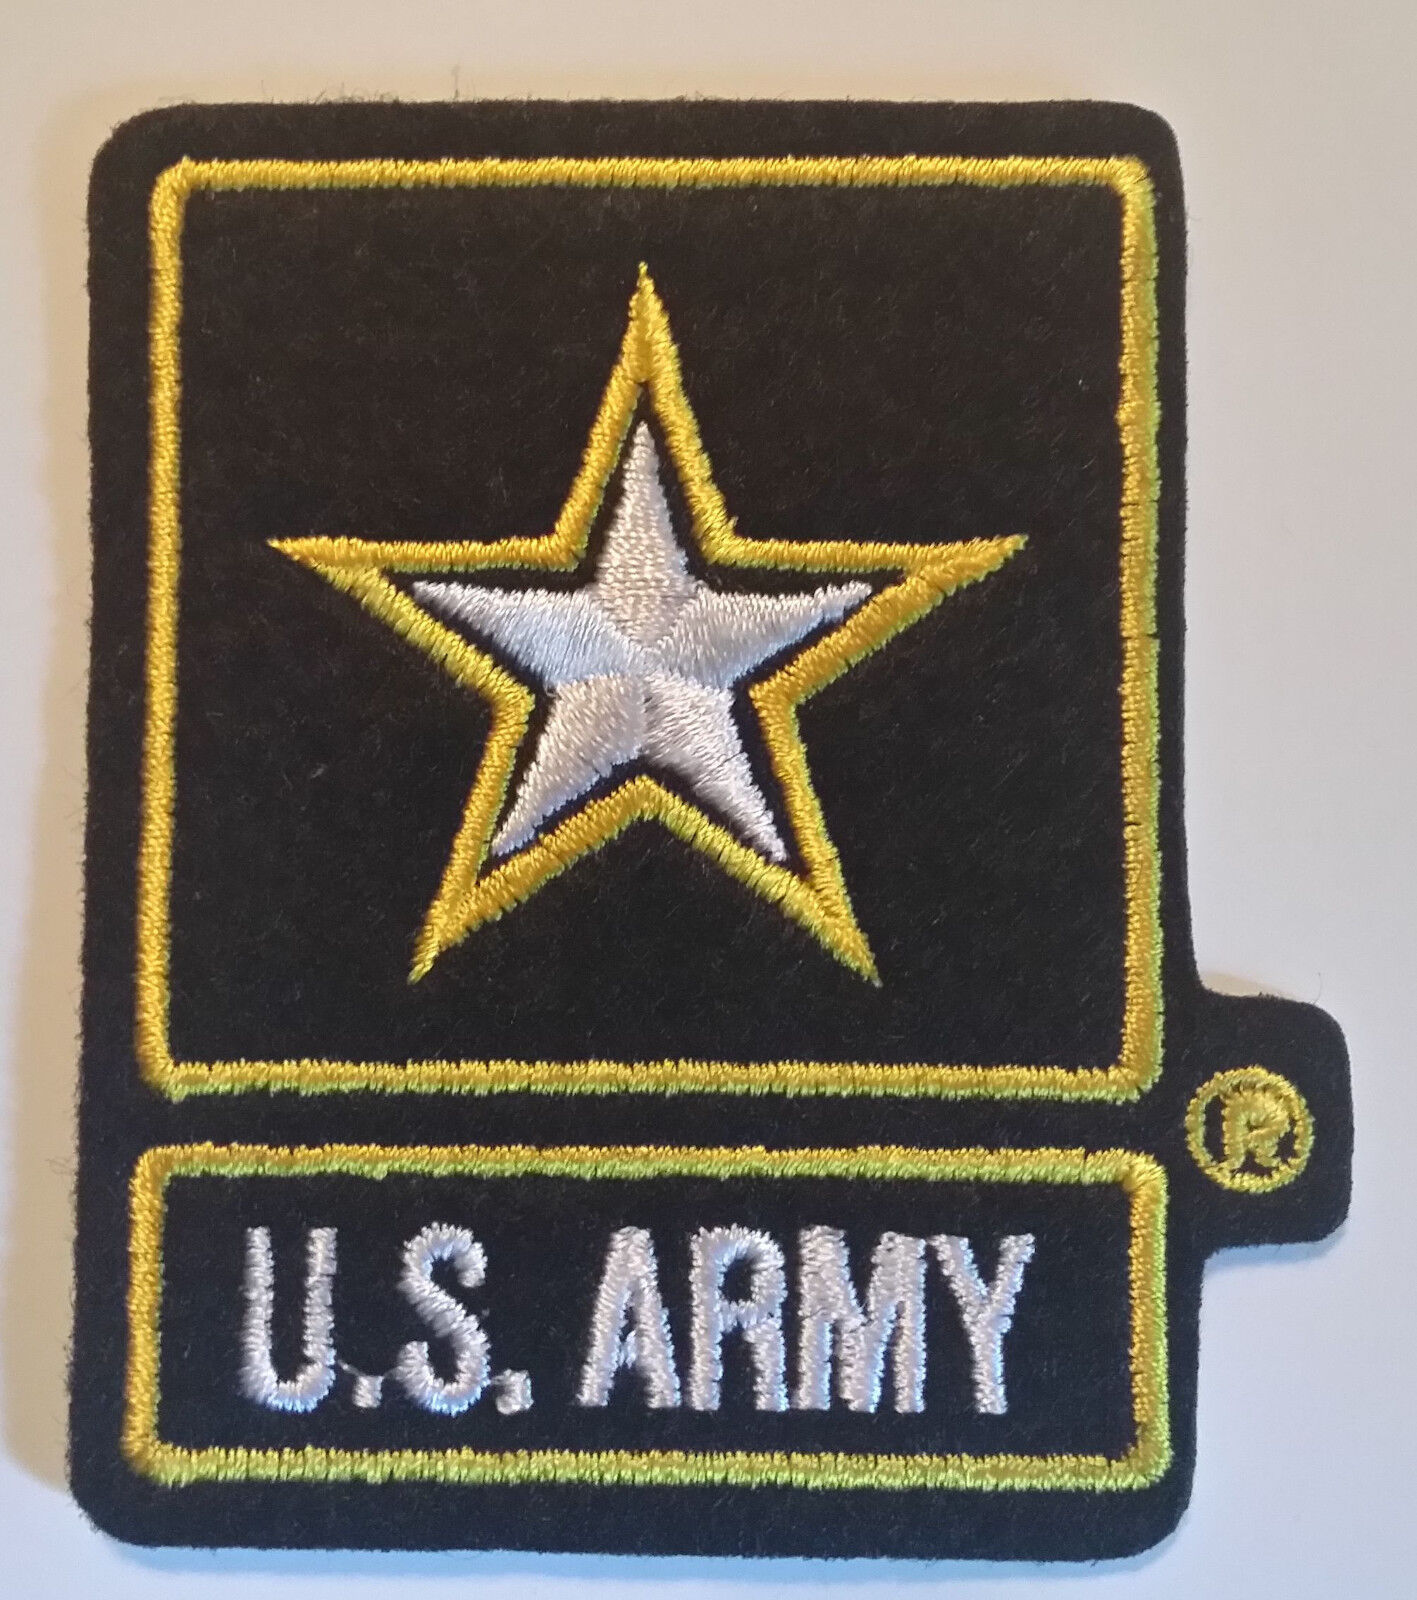 US ARMY STAR PATCH - MADE IN THE USA